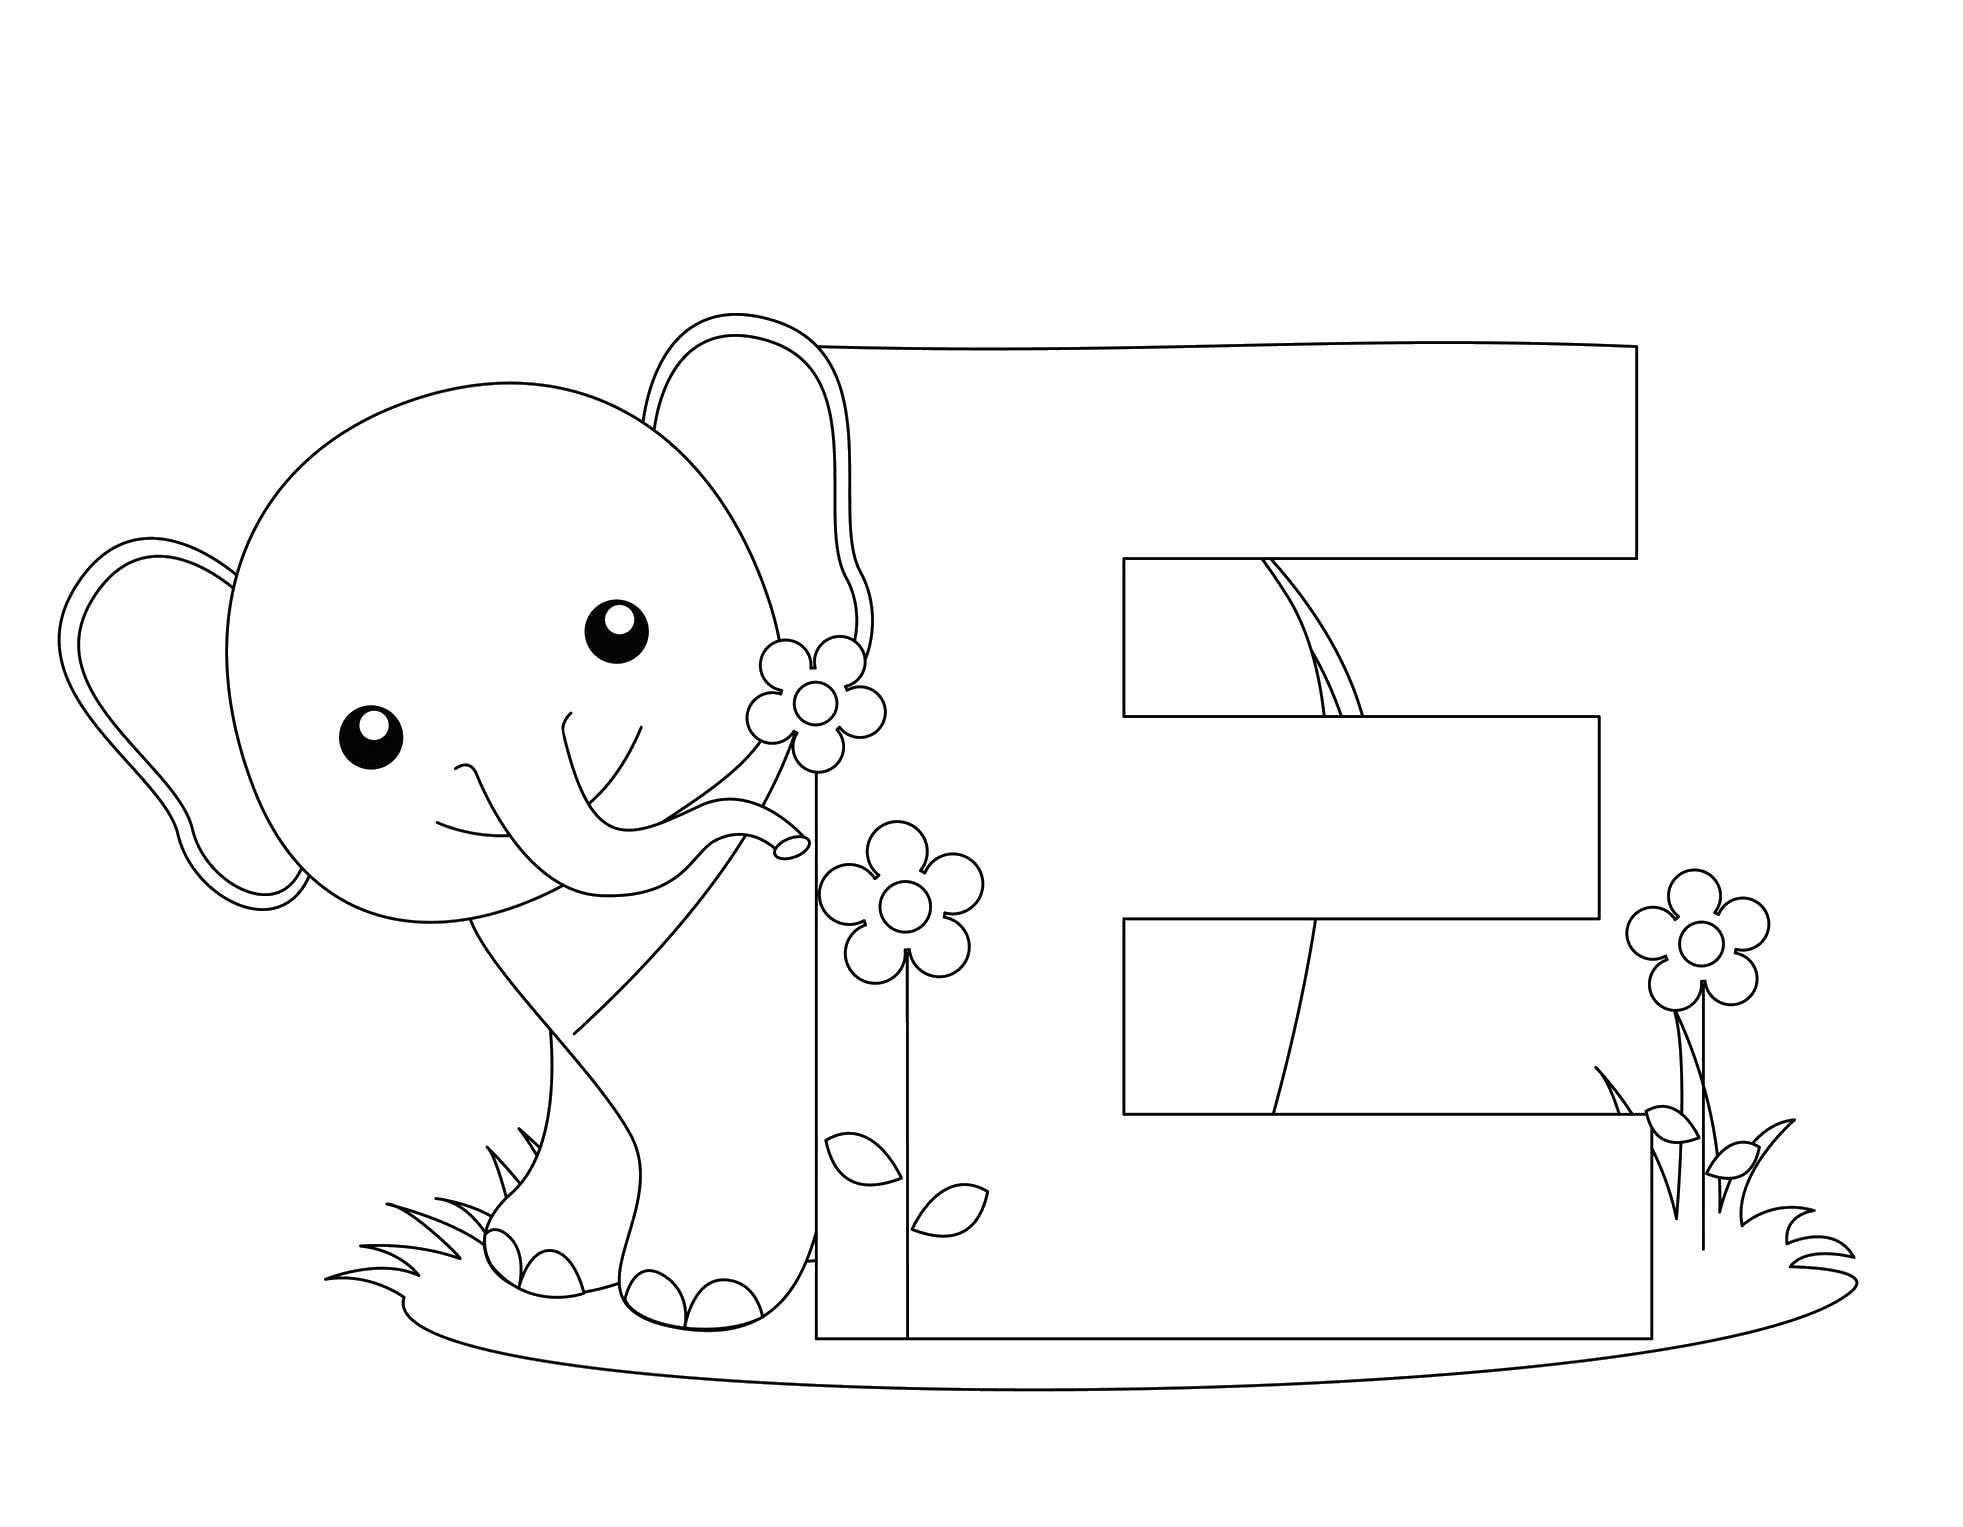 Coloring Elephant. Category English alphabet. Tags:  The alphabet, letters, words.